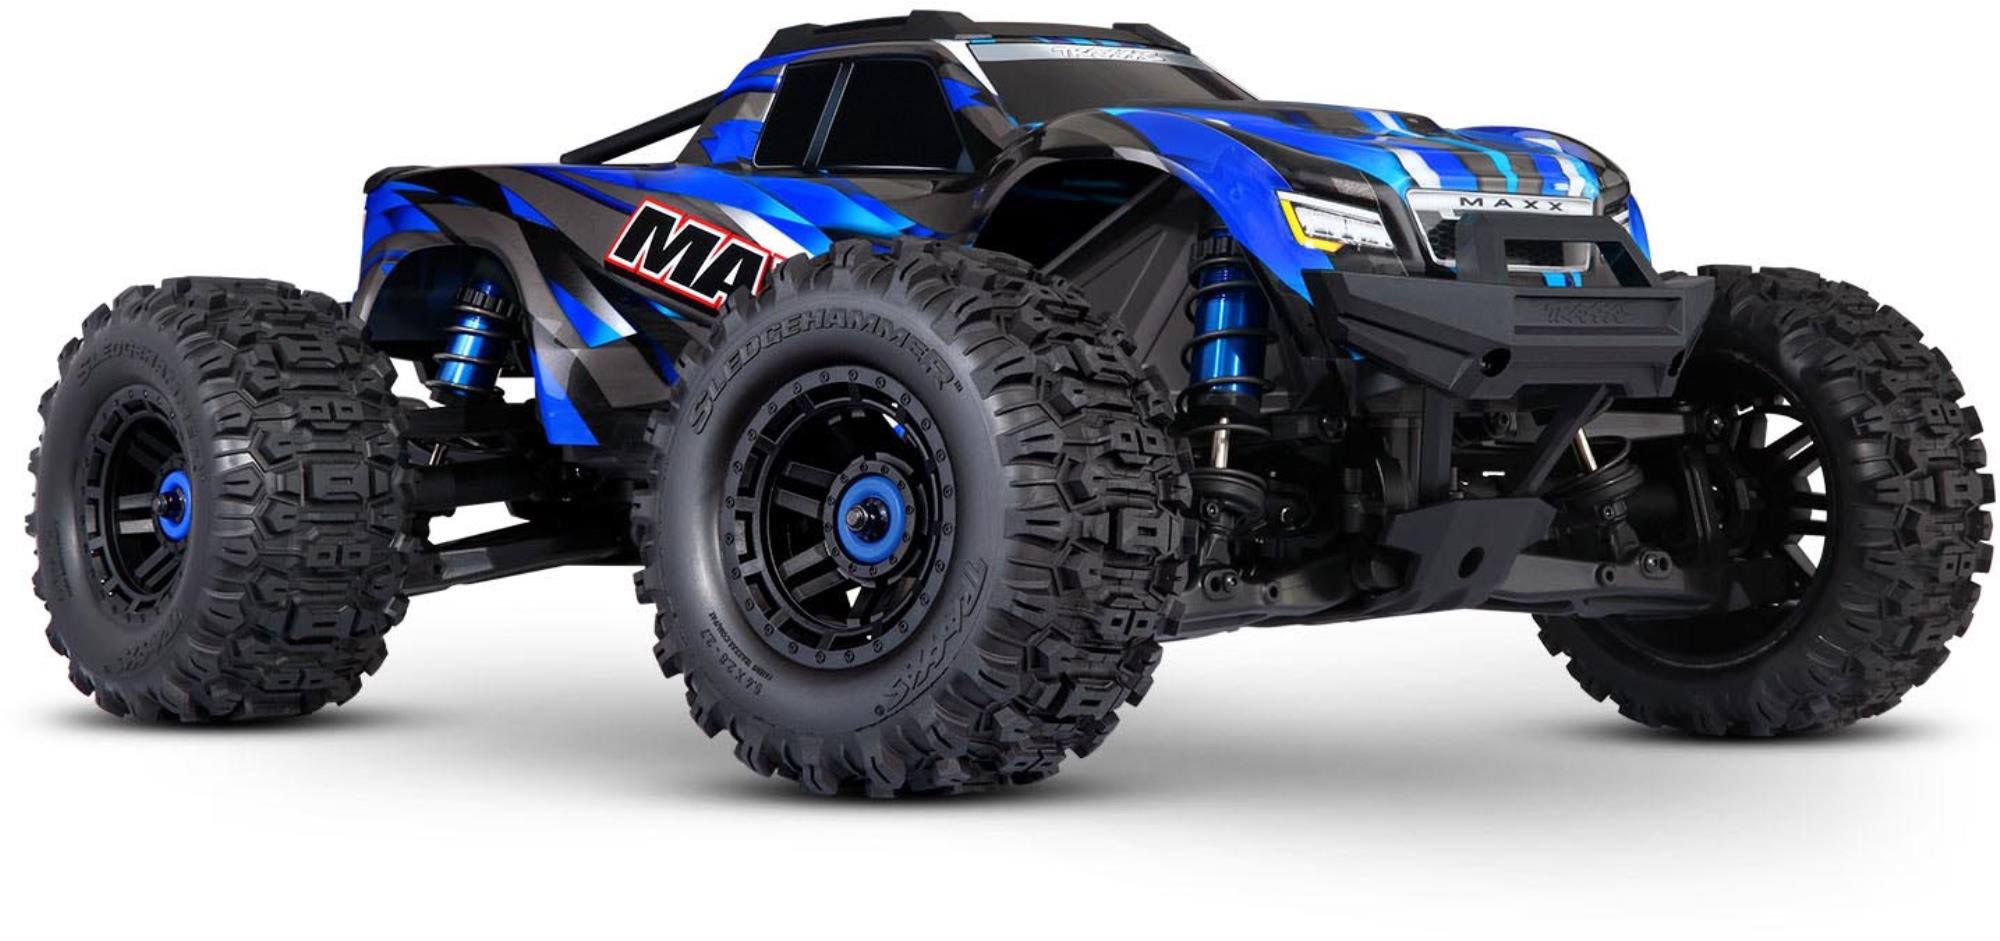 Traxxas Maxx V2 with WideMaxx 1/10 Electric RC Monster Truck - Blue 89086-4